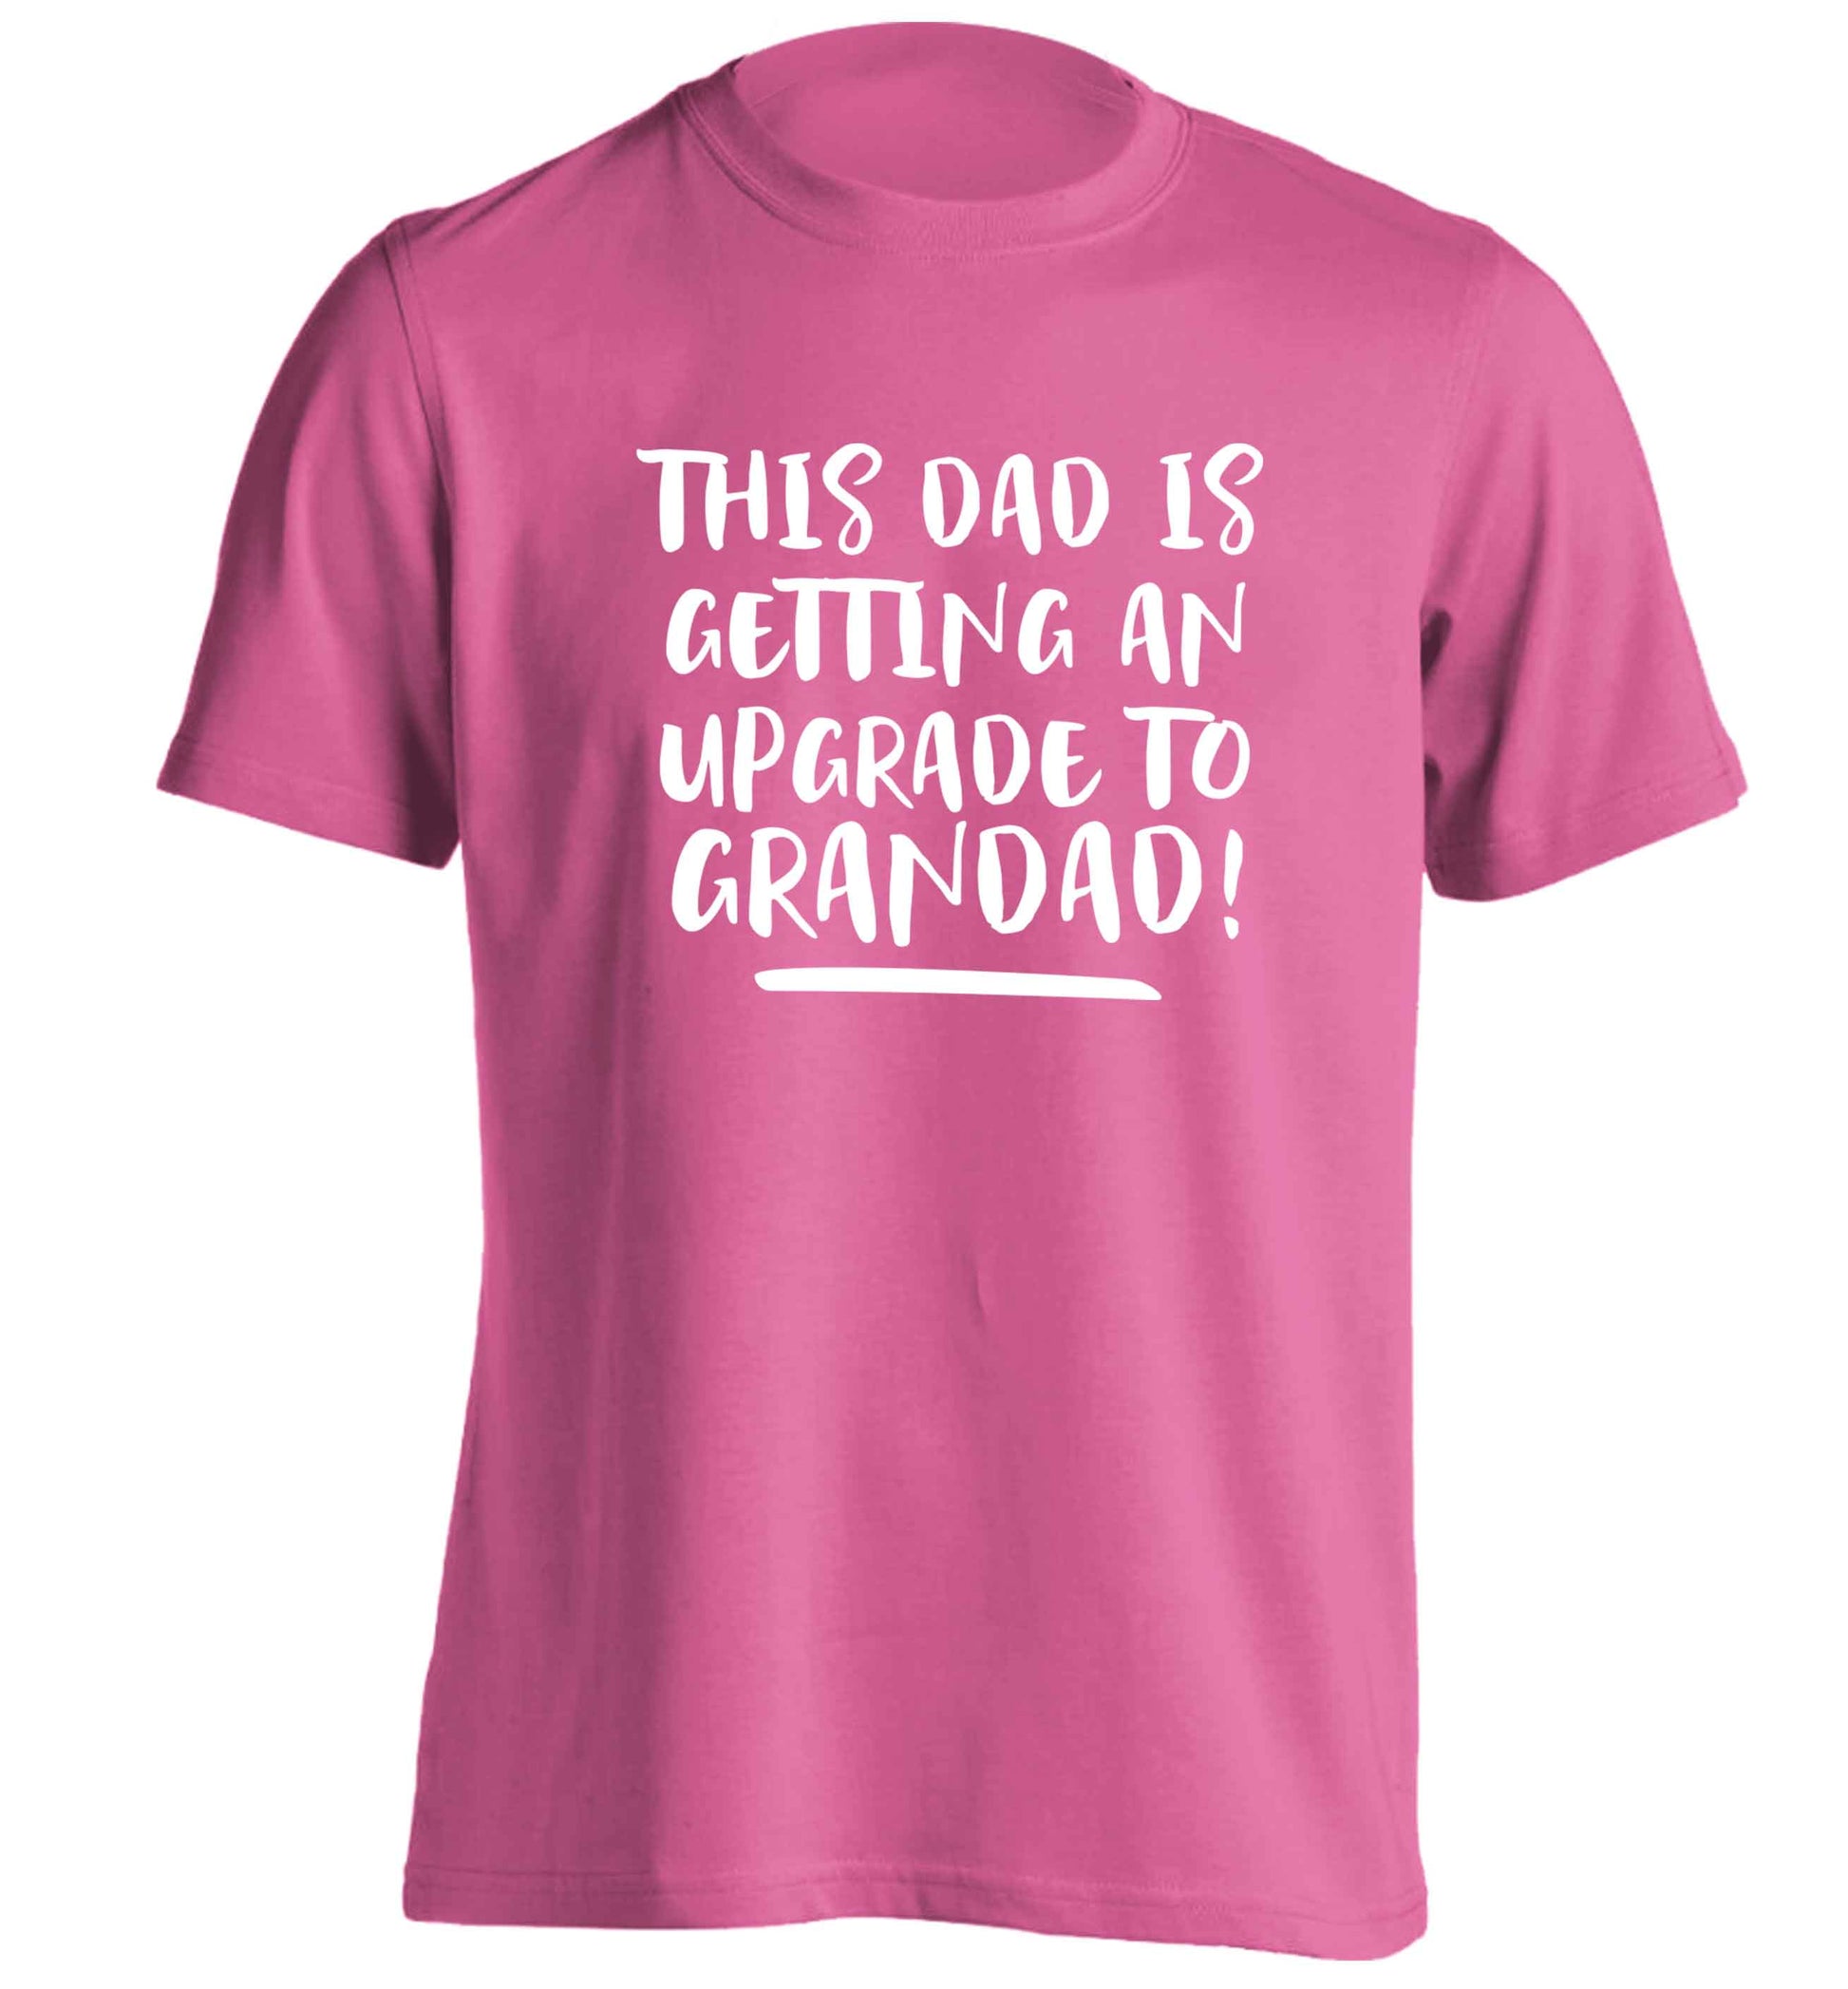 This dad is getting an upgrade to grandad! adults unisex pink Tshirt 2XL